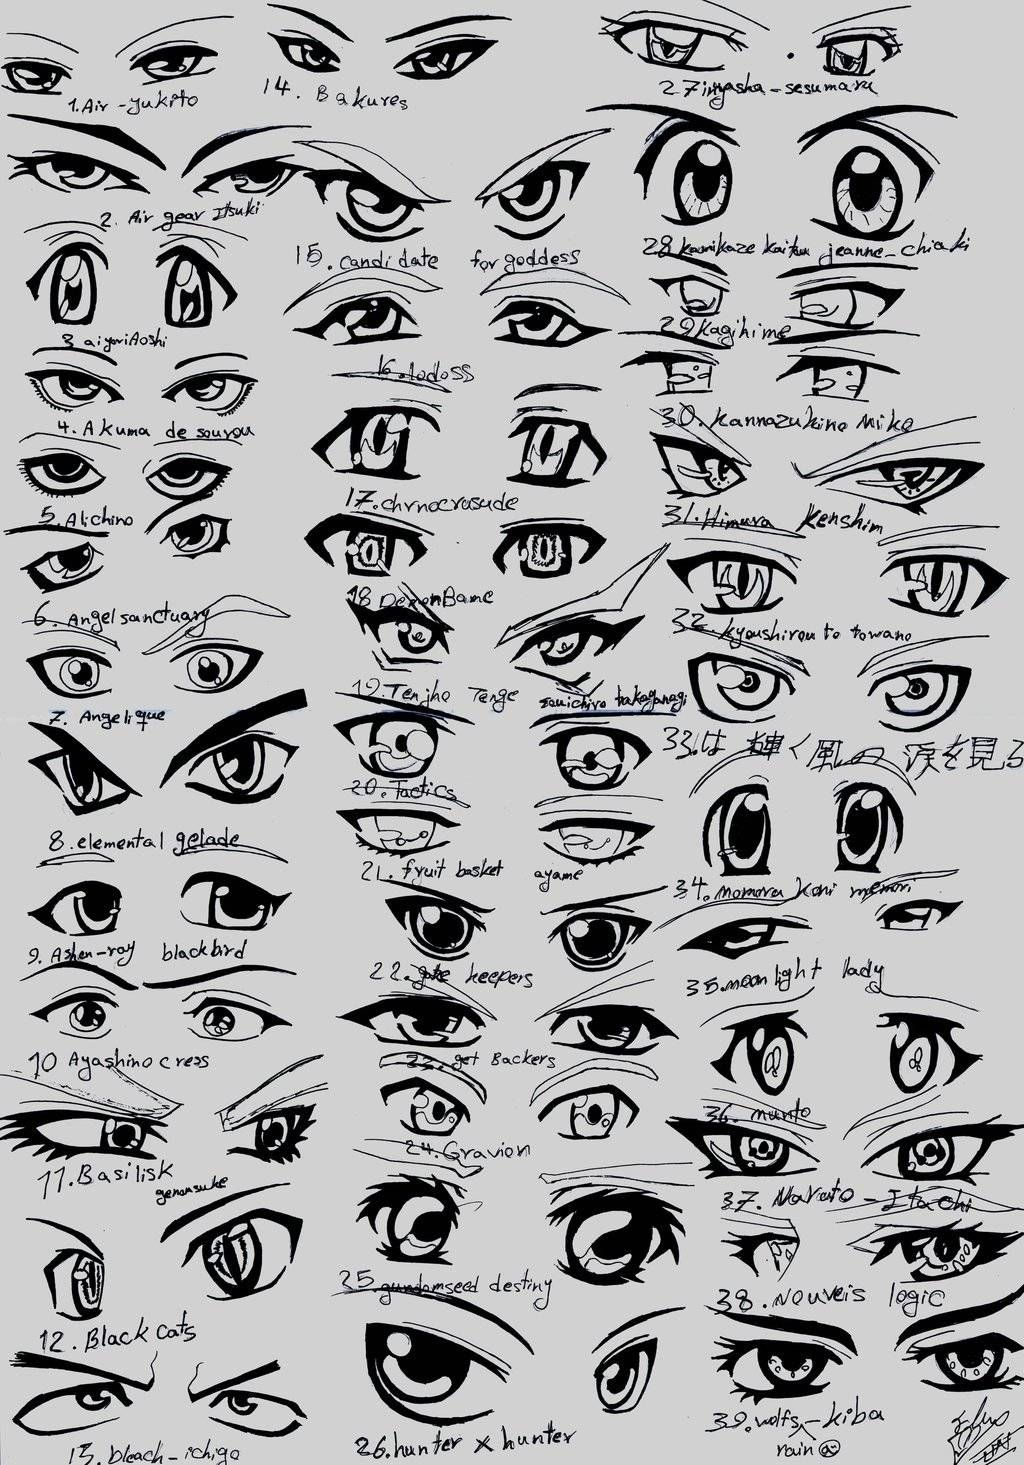 How To Draw Male Anime Eyes Widescreen 2 HD Wallpaper. How to draw anime eyes, Anime eyes, Manga eyes